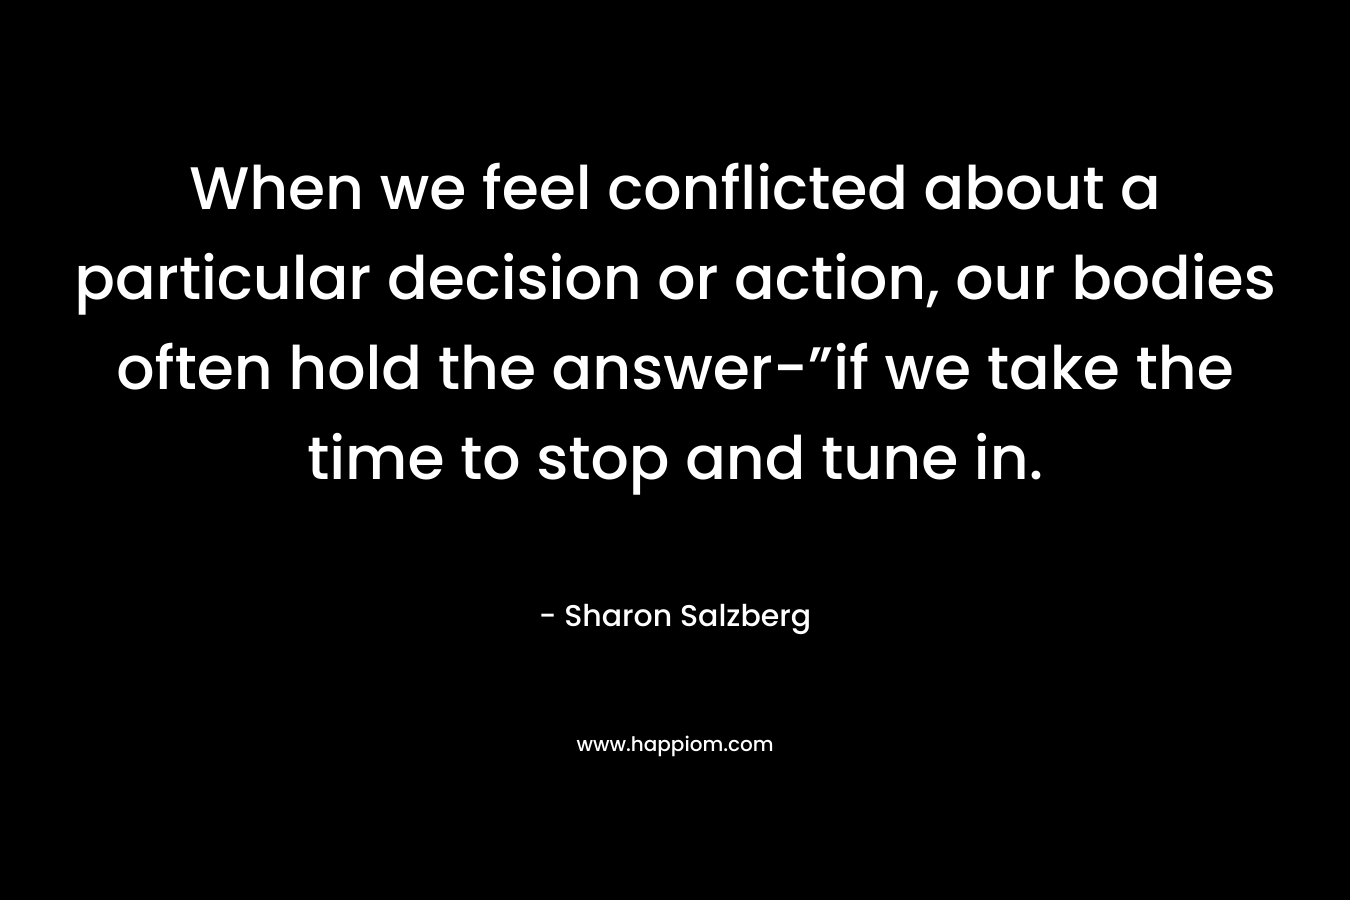 When we feel conflicted about a particular decision or action, our bodies often hold the answer-”if we take the time to stop and tune in.